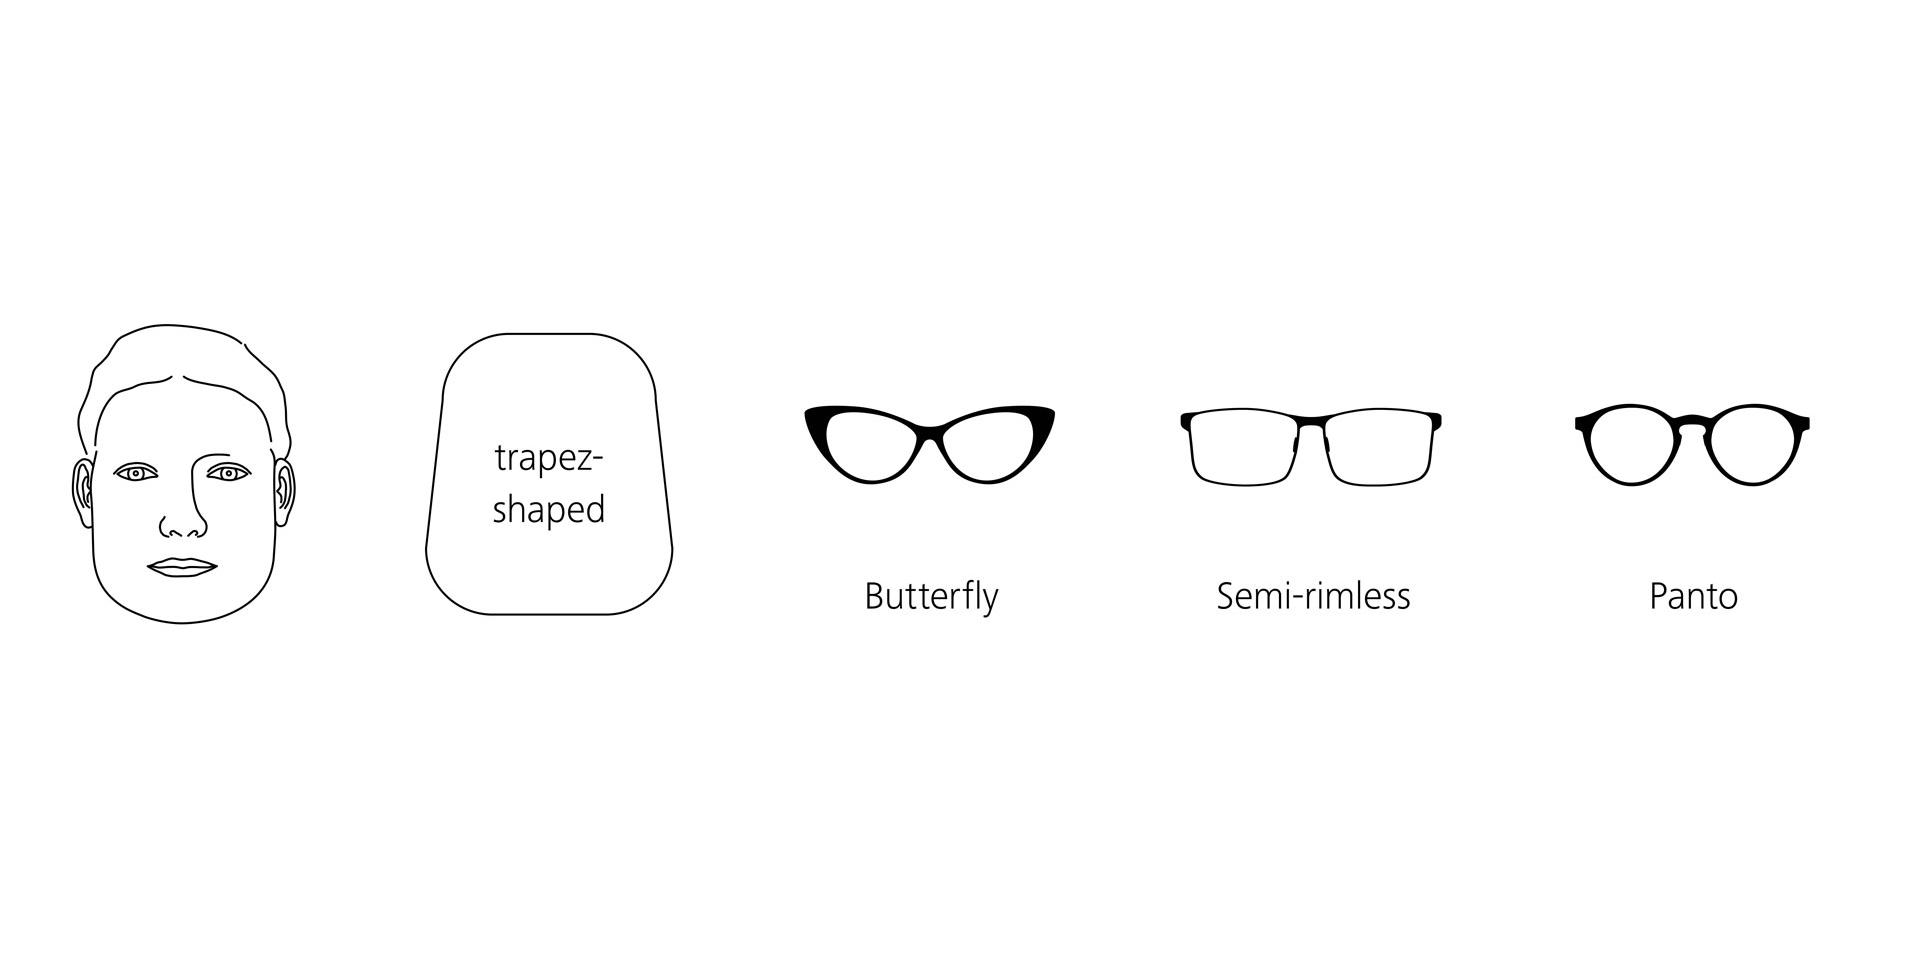 Graphic showing a trapez-shaped face and matching eyeglass frames.